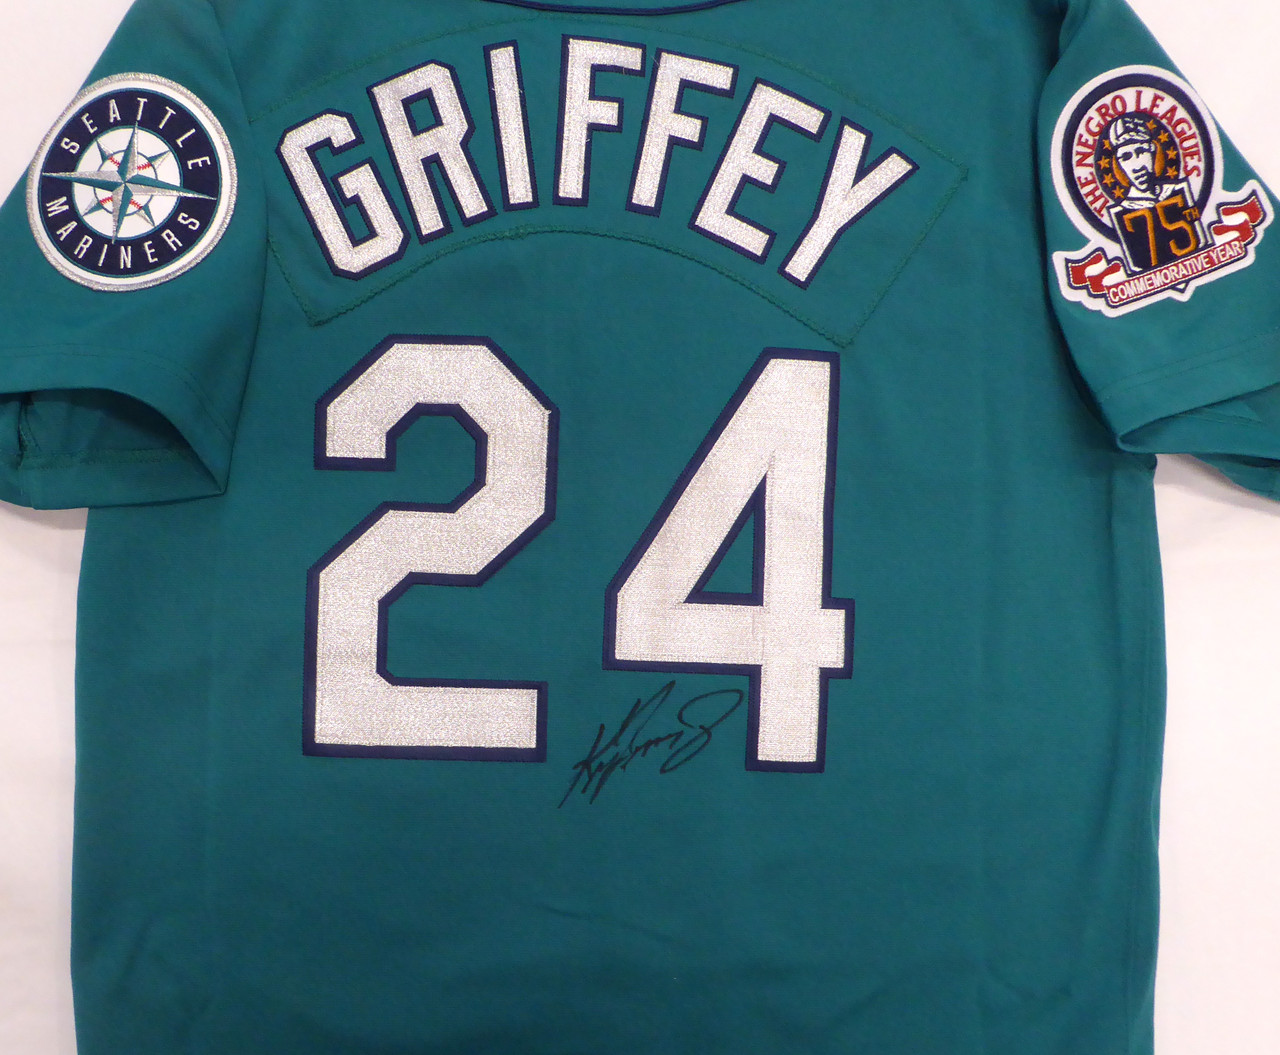  Mariners Ken Griffey Jr. Autographed Teal Authentic